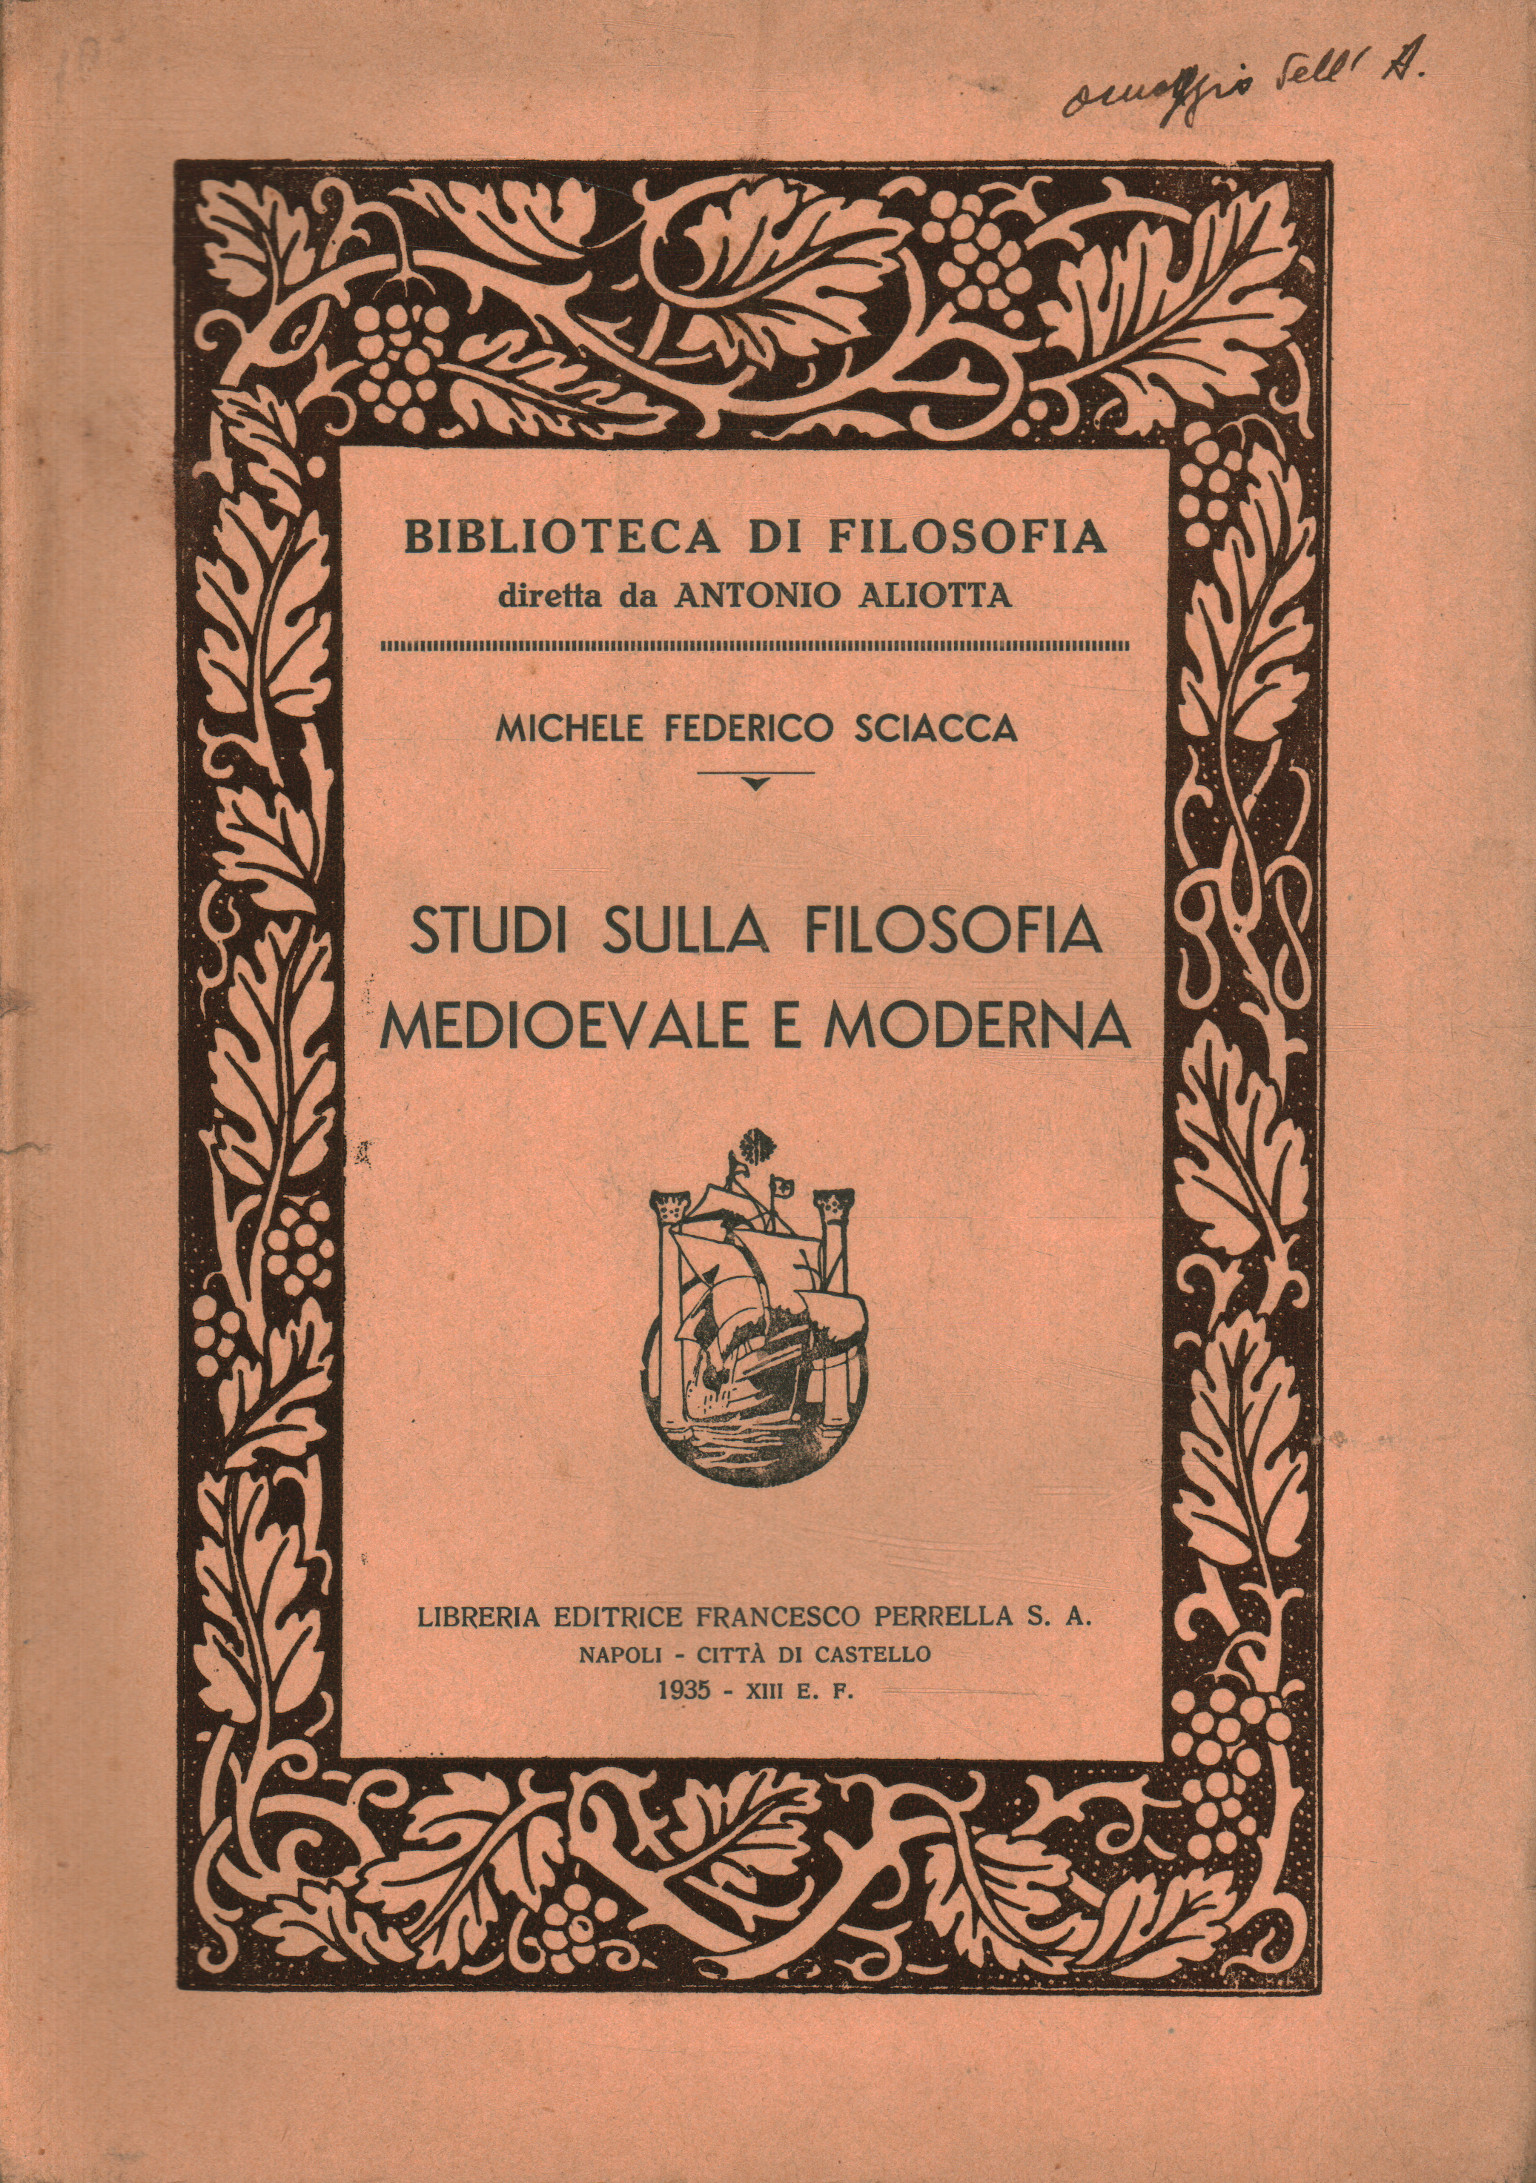 Studies on medieval and moder philosophy